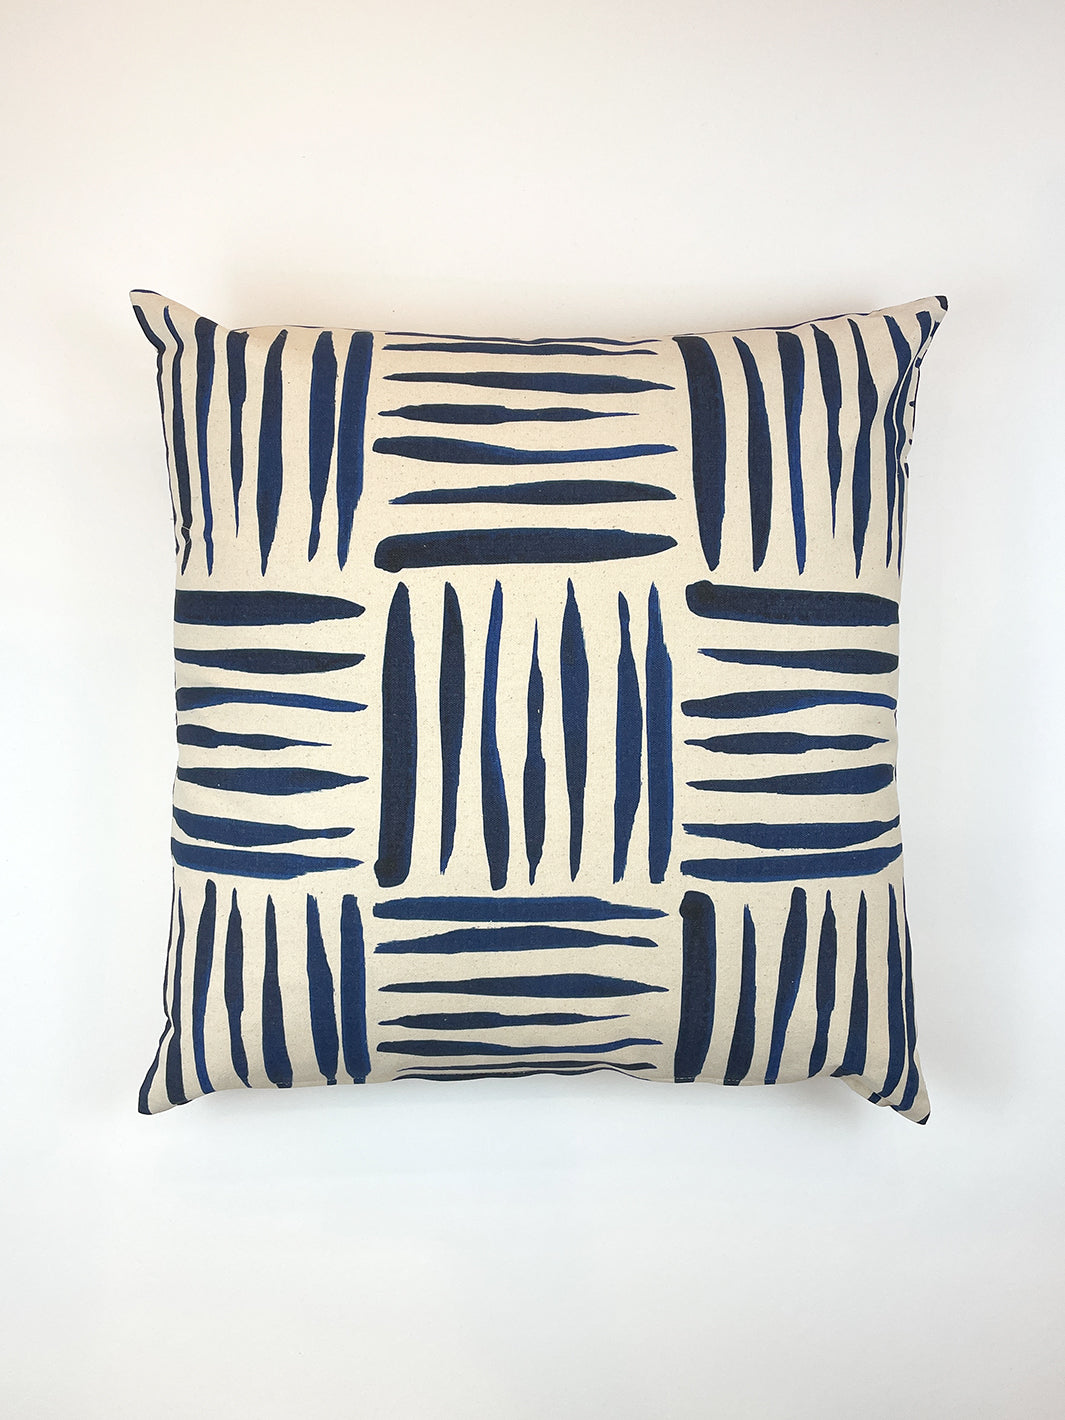 'Watercolor Weave Small' Throw Pillow - Blue on Raw Canvas